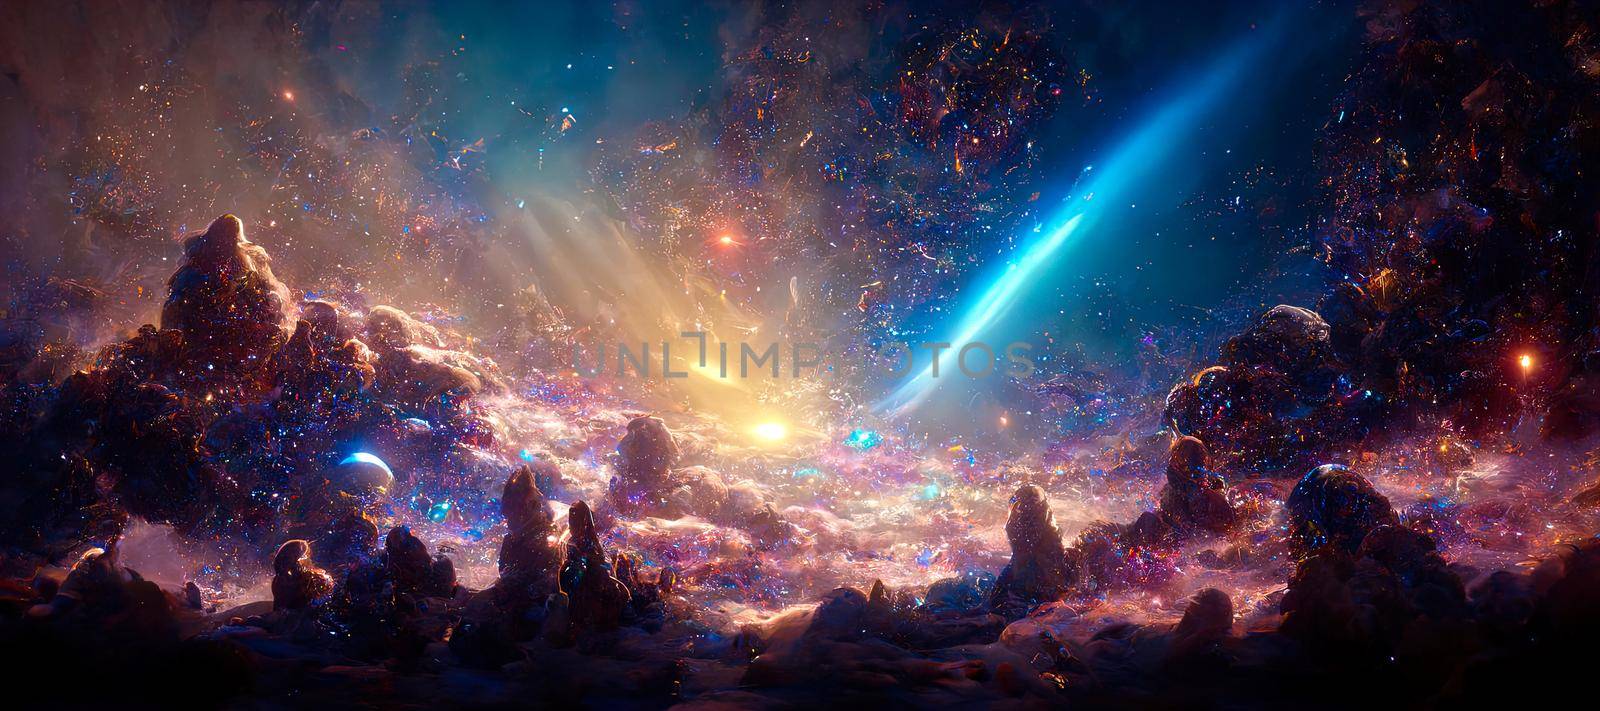 illustration on the theme Travel in space with stars and nebulae of the universe by TRMK